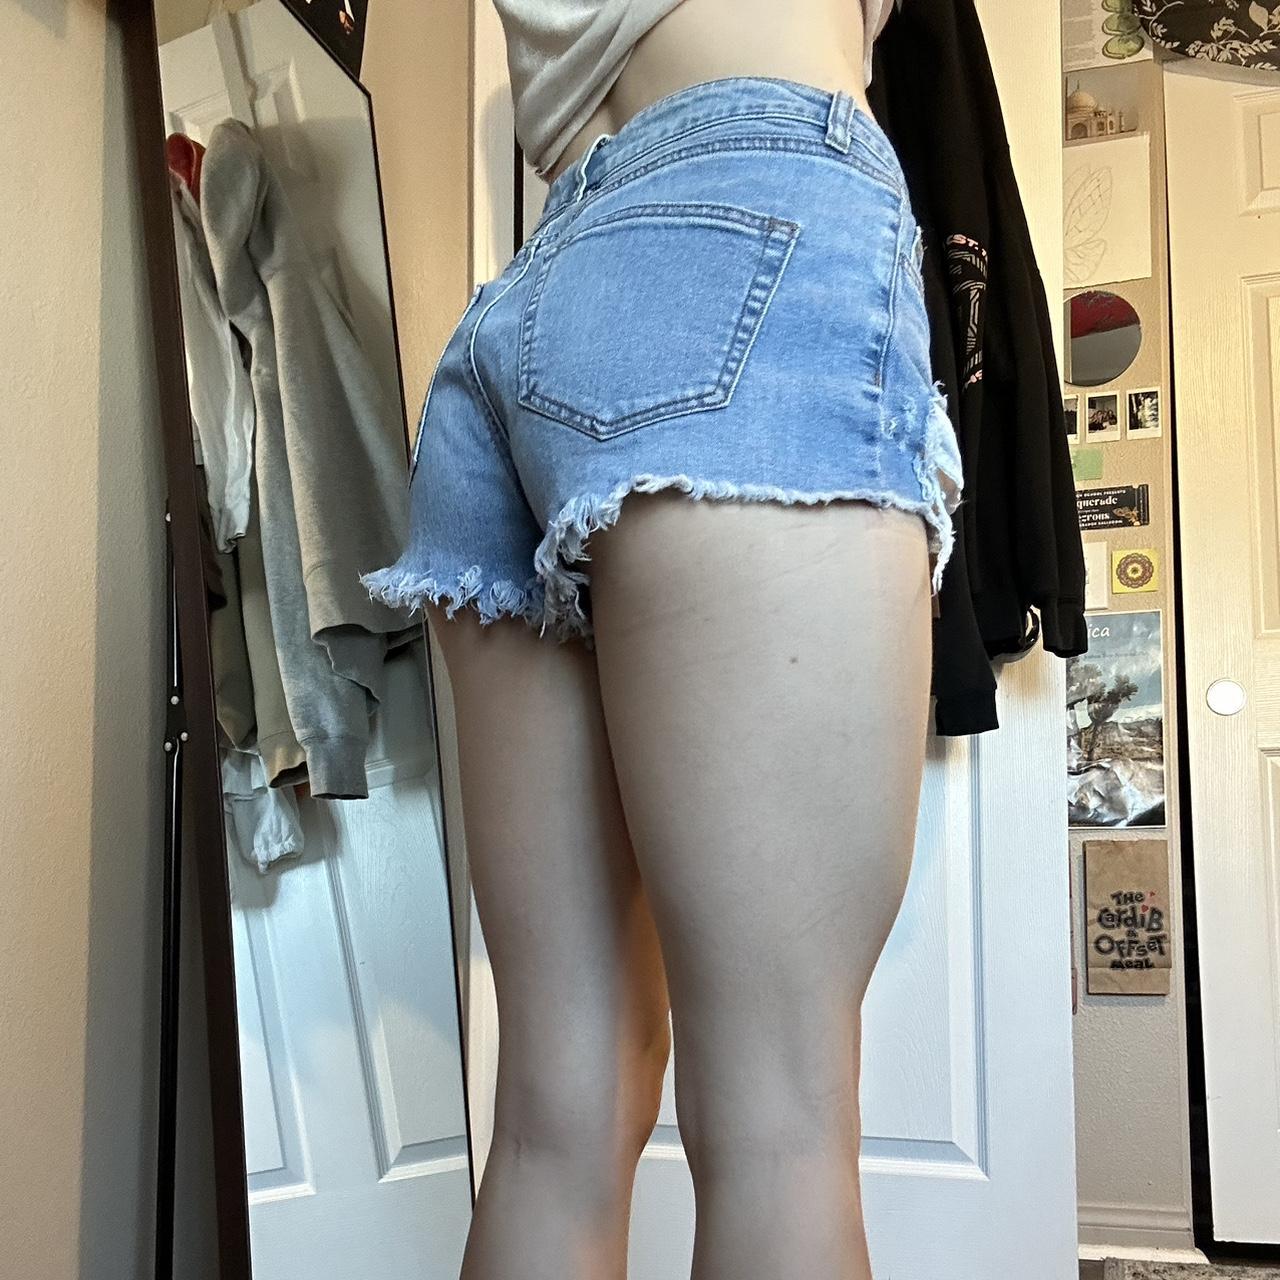 super cute short shorts has a tie in the front - Depop